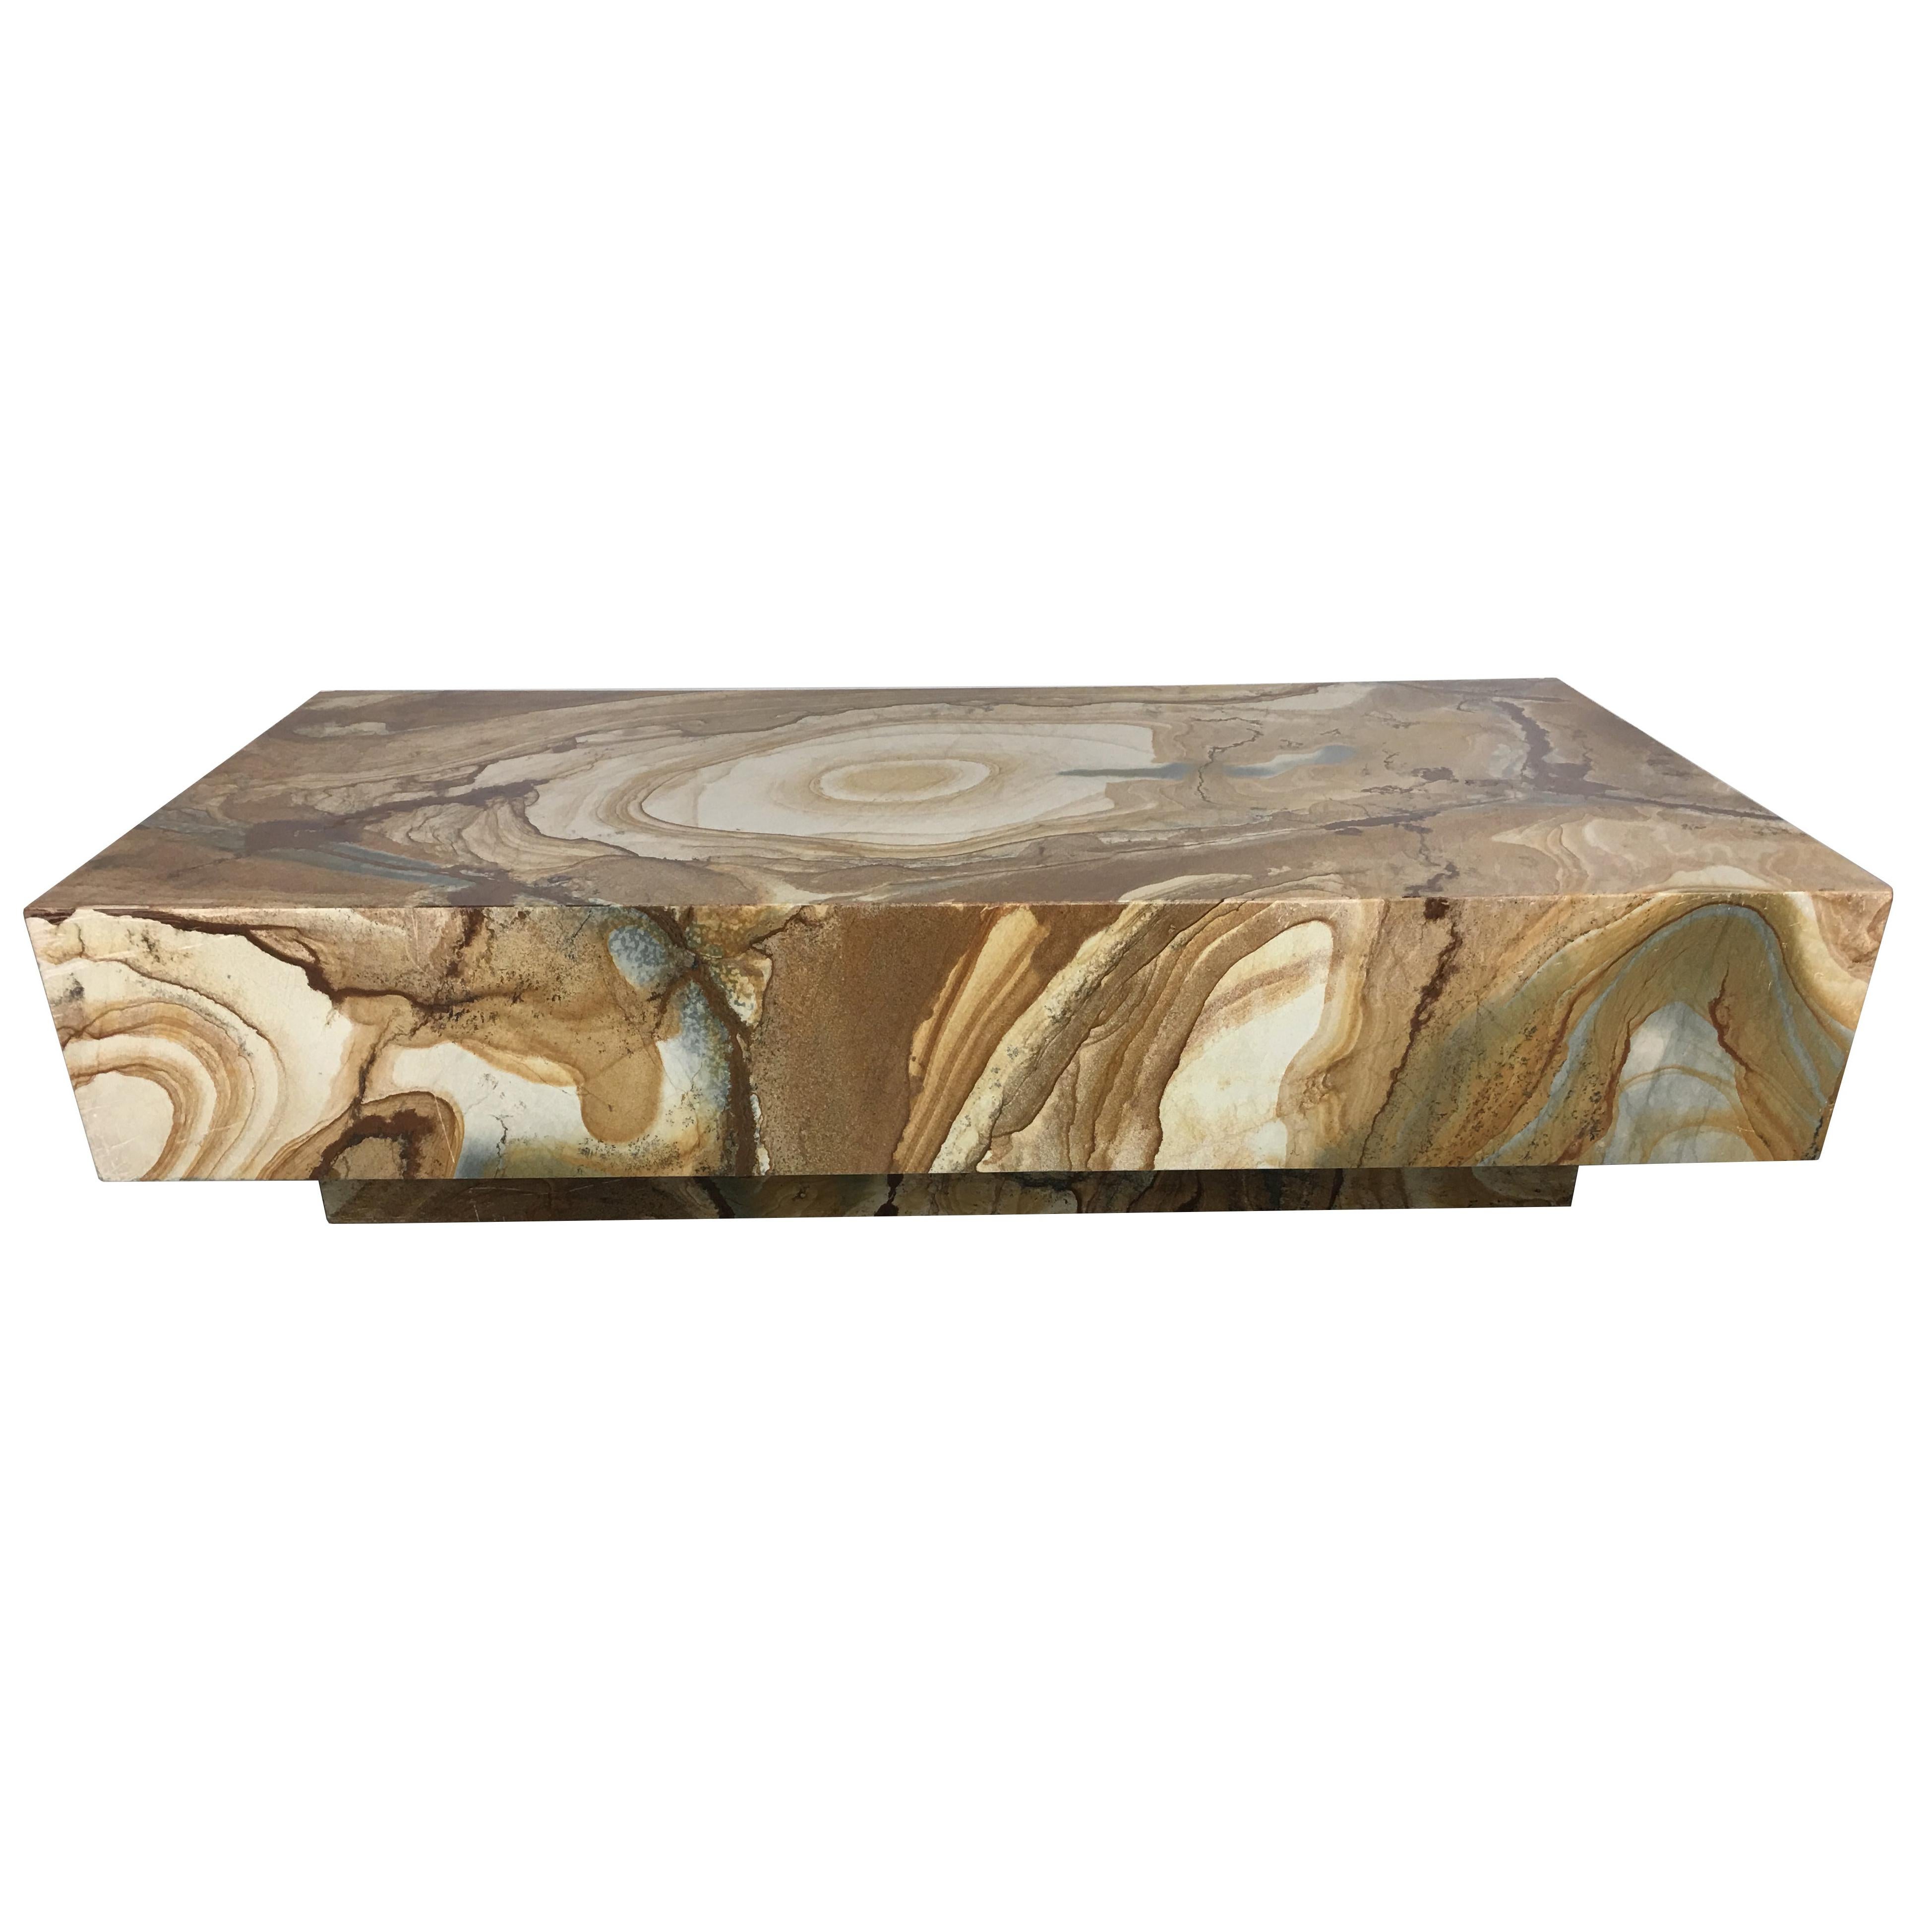 Spectacular Floating Marble “Slab” Coffee Table